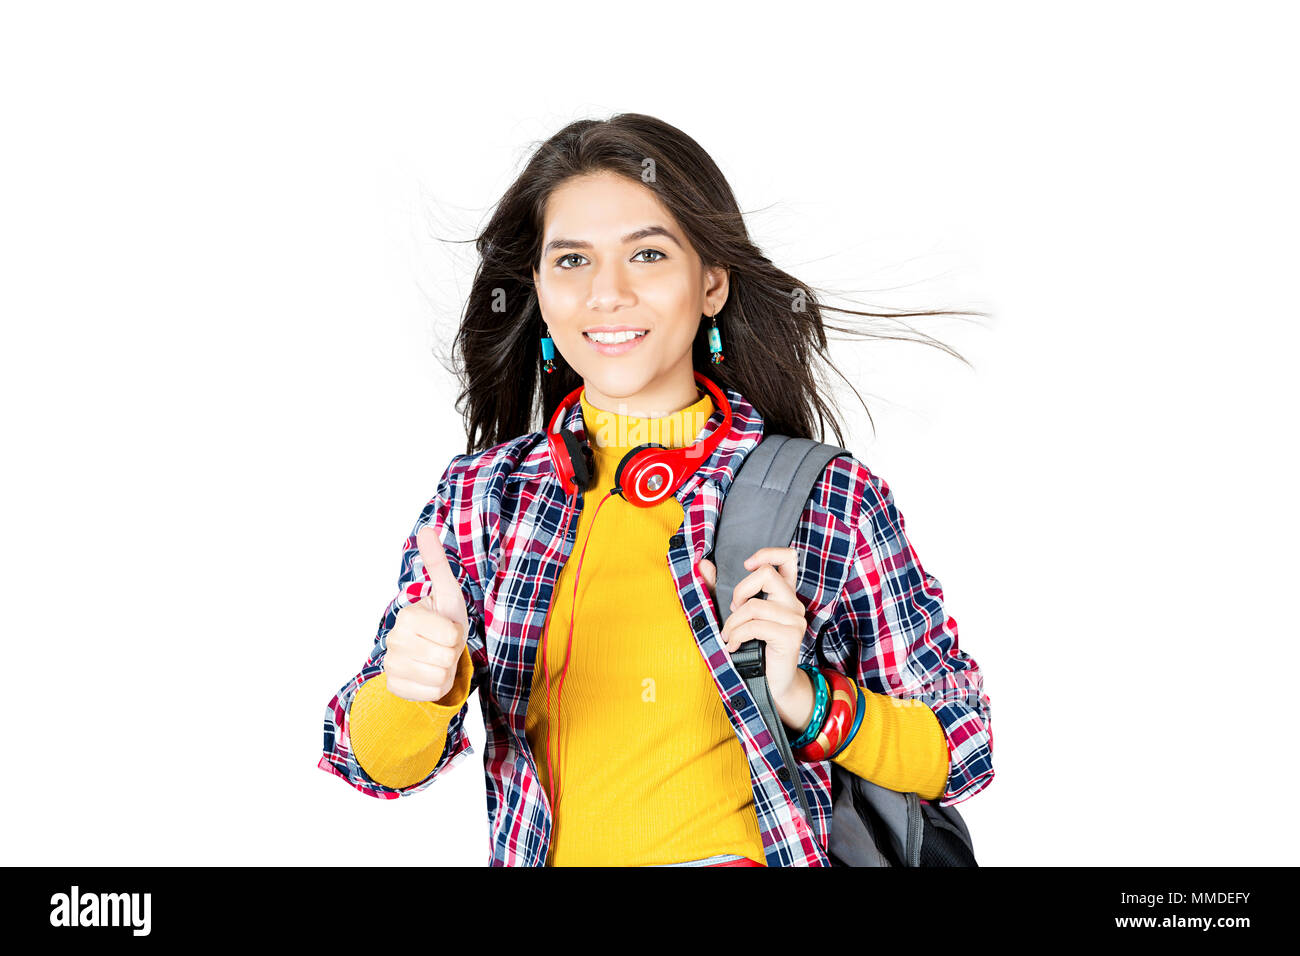 Smiling One Young Woman College Student Standing With Bag Stock Photo